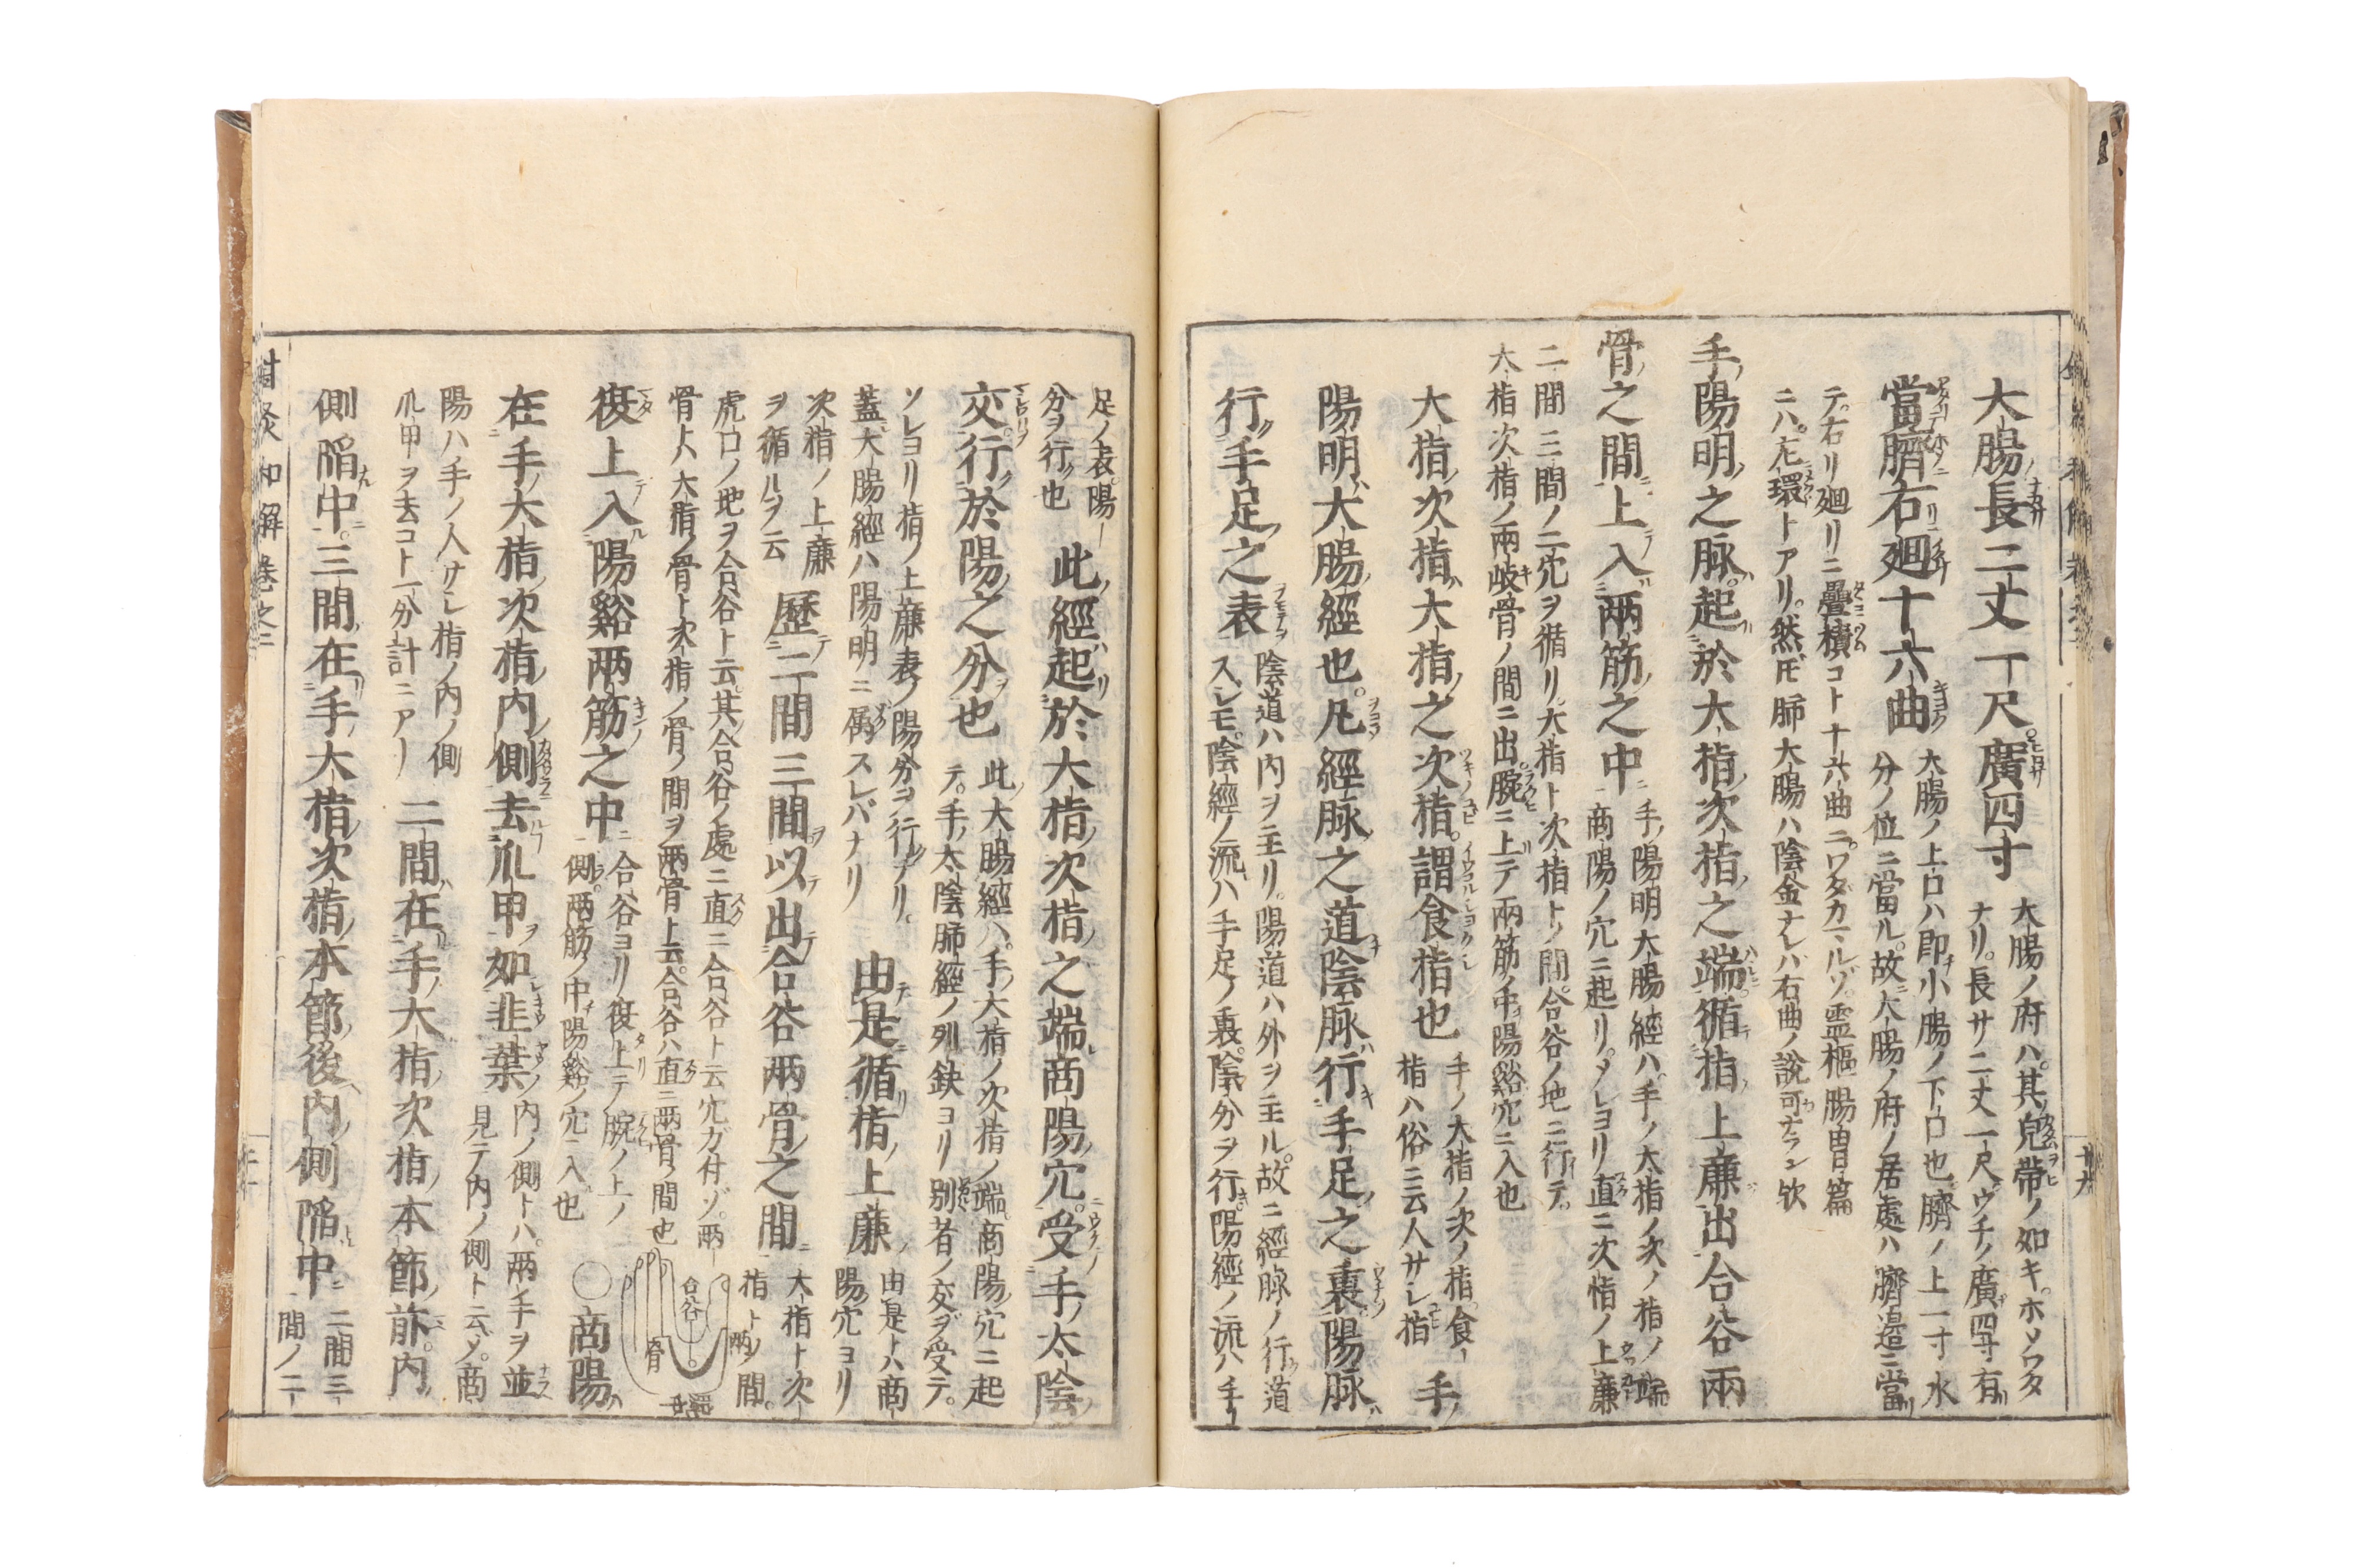 Japanese Woodblock Printed Book on Chinese Medicine - Image 4 of 5